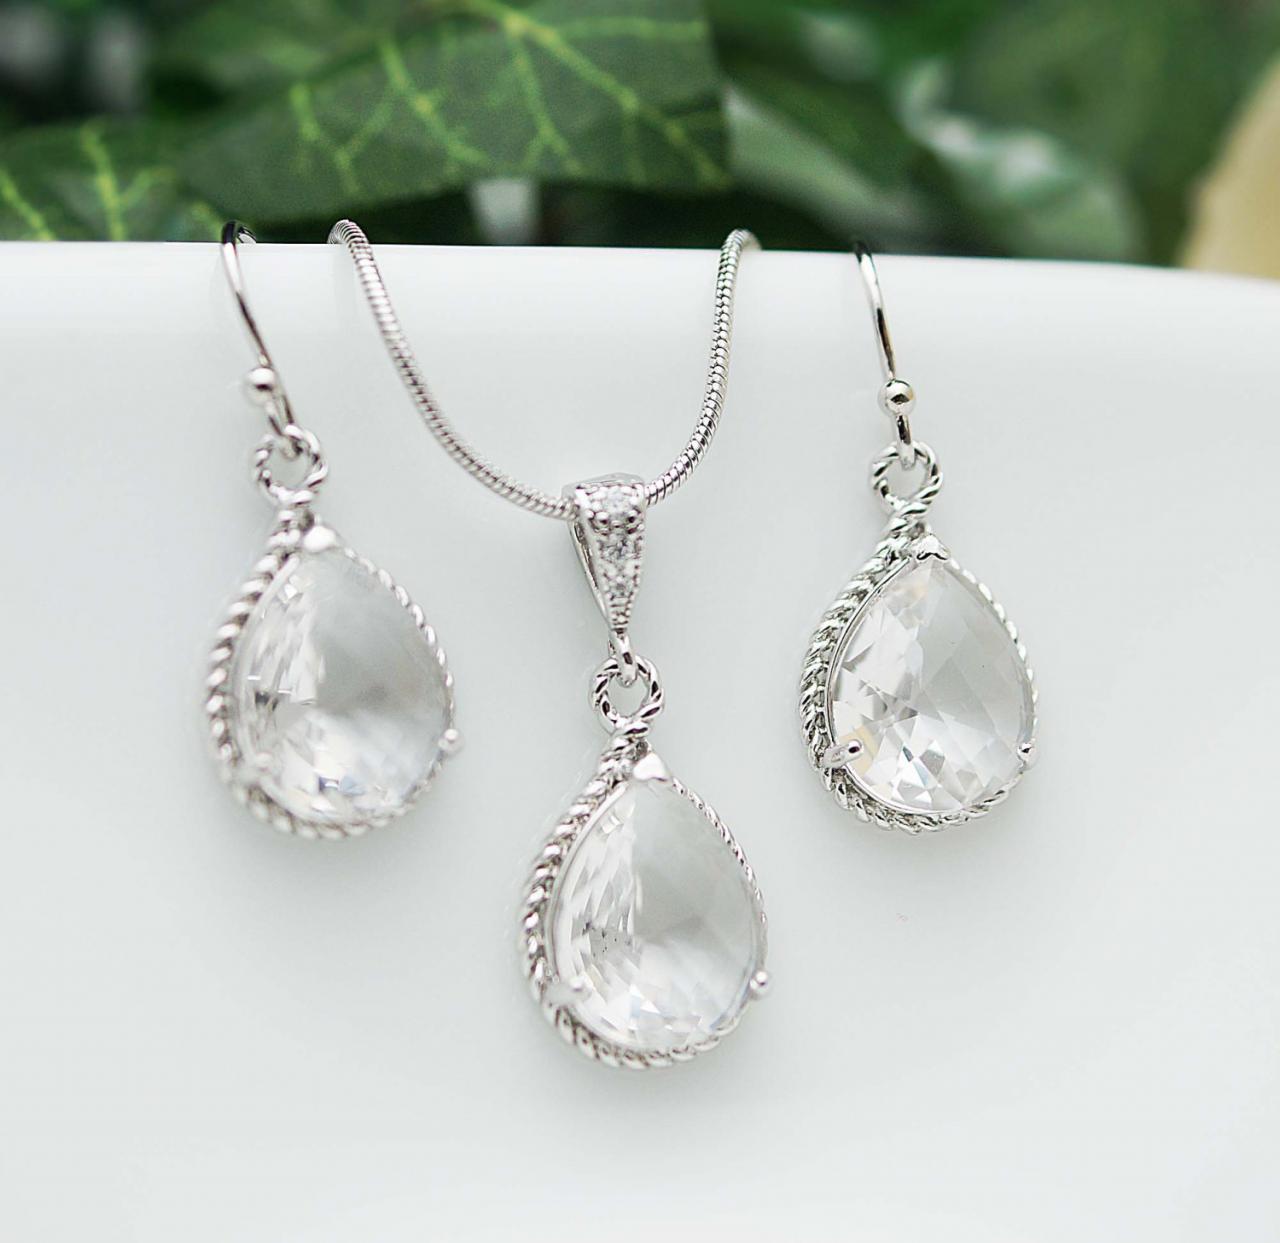 Wedding Jewelry Bridesmaid Jewelry Bridesmaid Earrings Bridesmaid Necklace Clear Glass Rhodium Trimmed Pear Cut Bridesmaid Gift